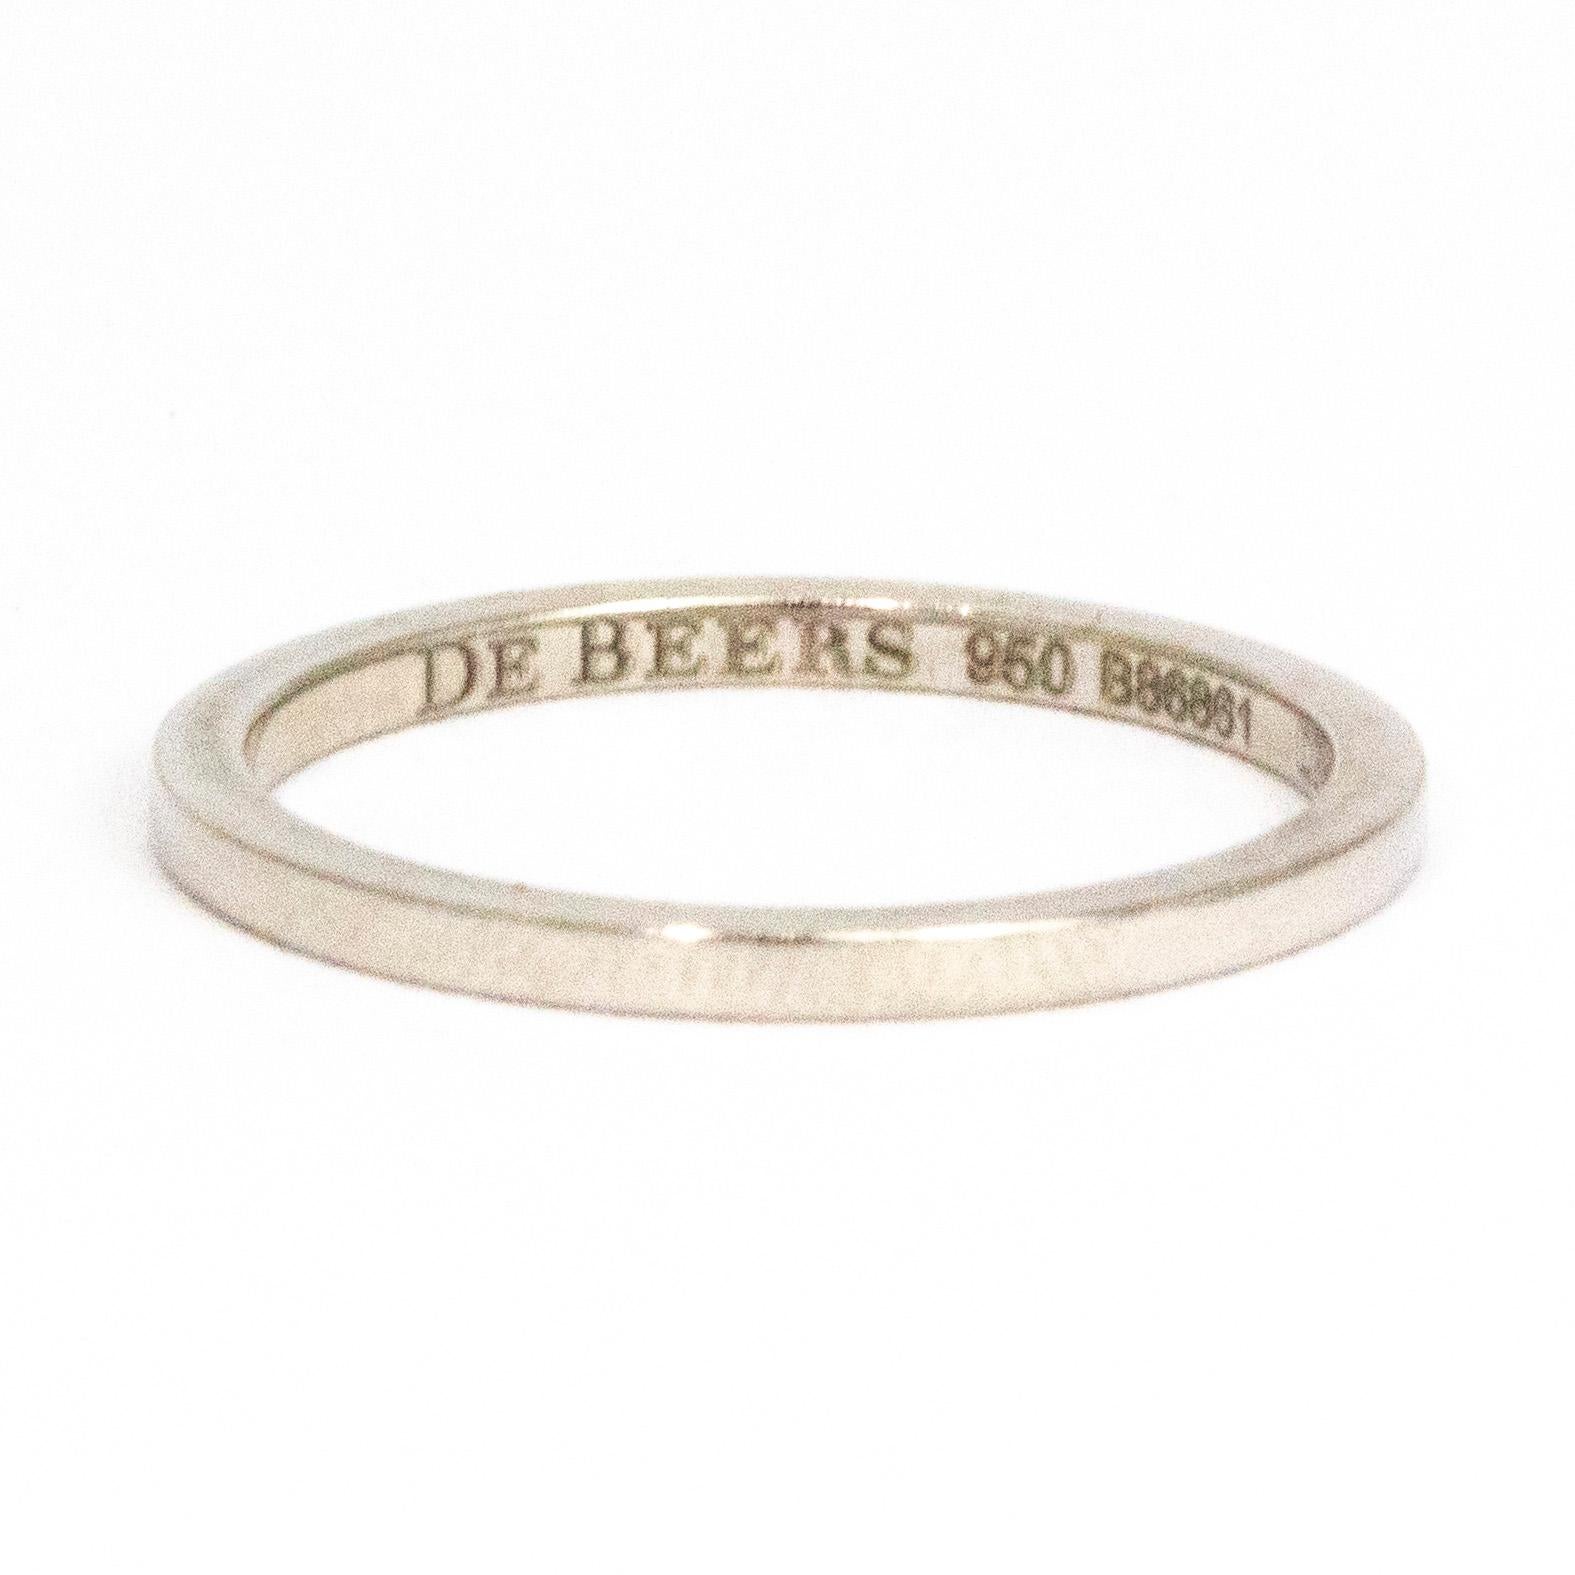 This gorgeously simple band is created by the wonderful jeweller De Beers. The band is modelled in platinum and has such a simple yet beautiful design. The inner band has the makers signature and code engraved.

Ring Size: J 1/2 or 5
Band Width: